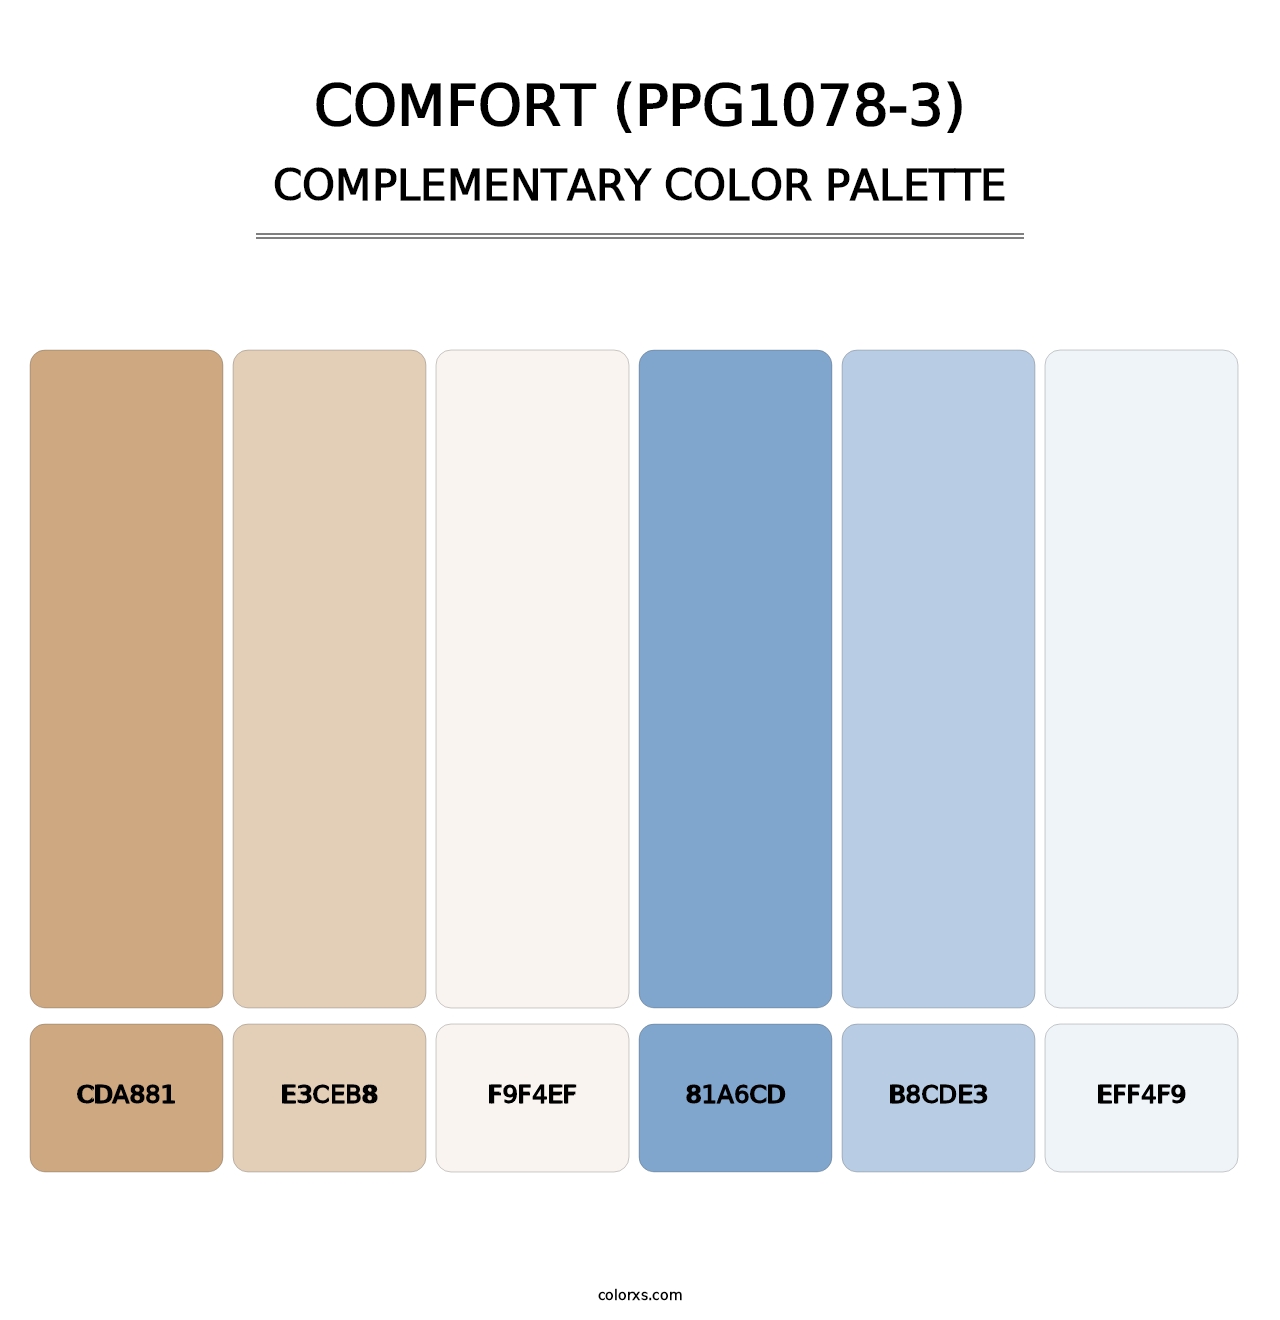 Comfort (PPG1078-3) - Complementary Color Palette